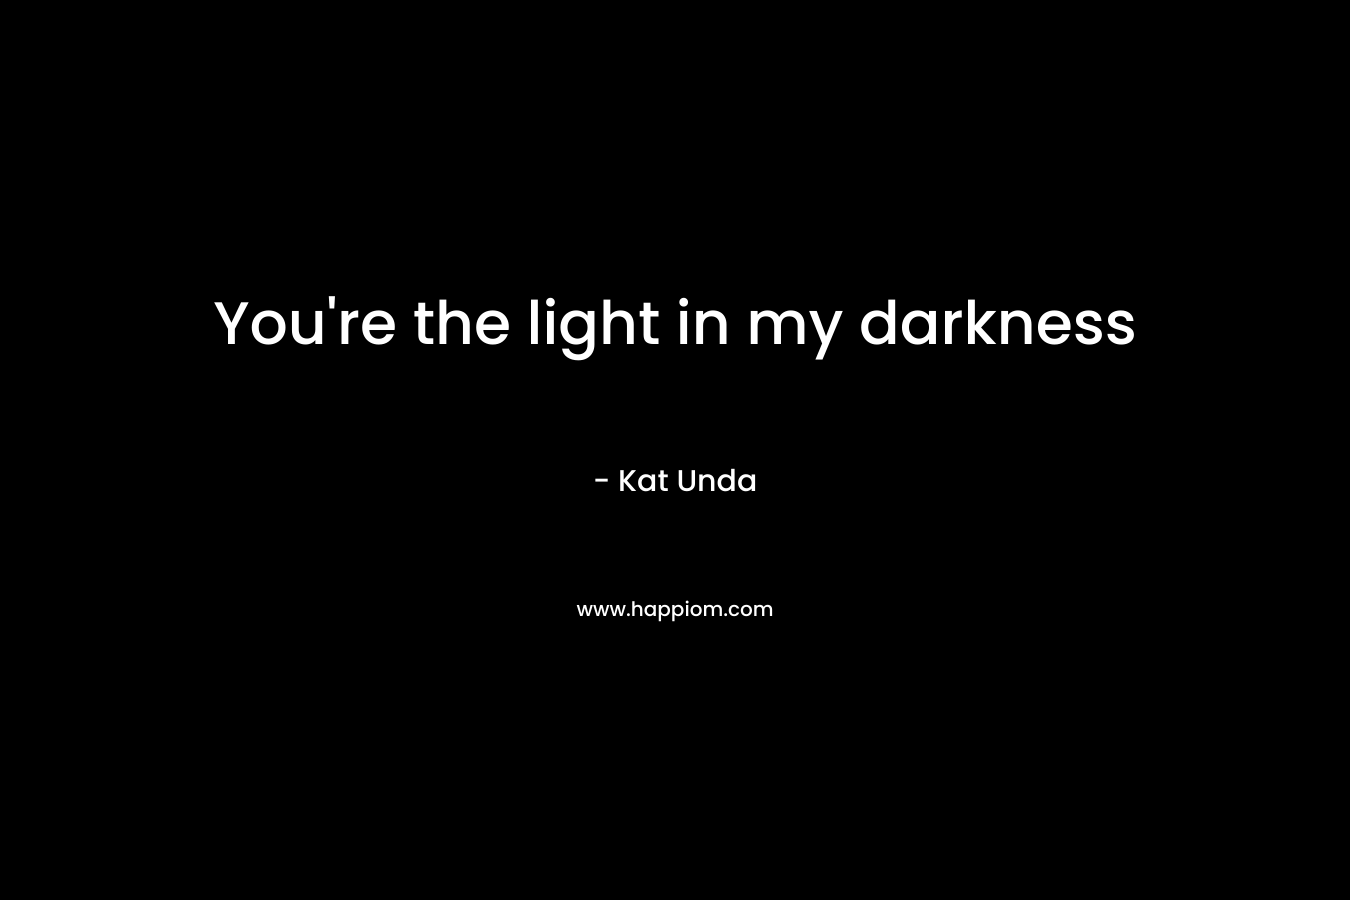 You're the light in my darkness